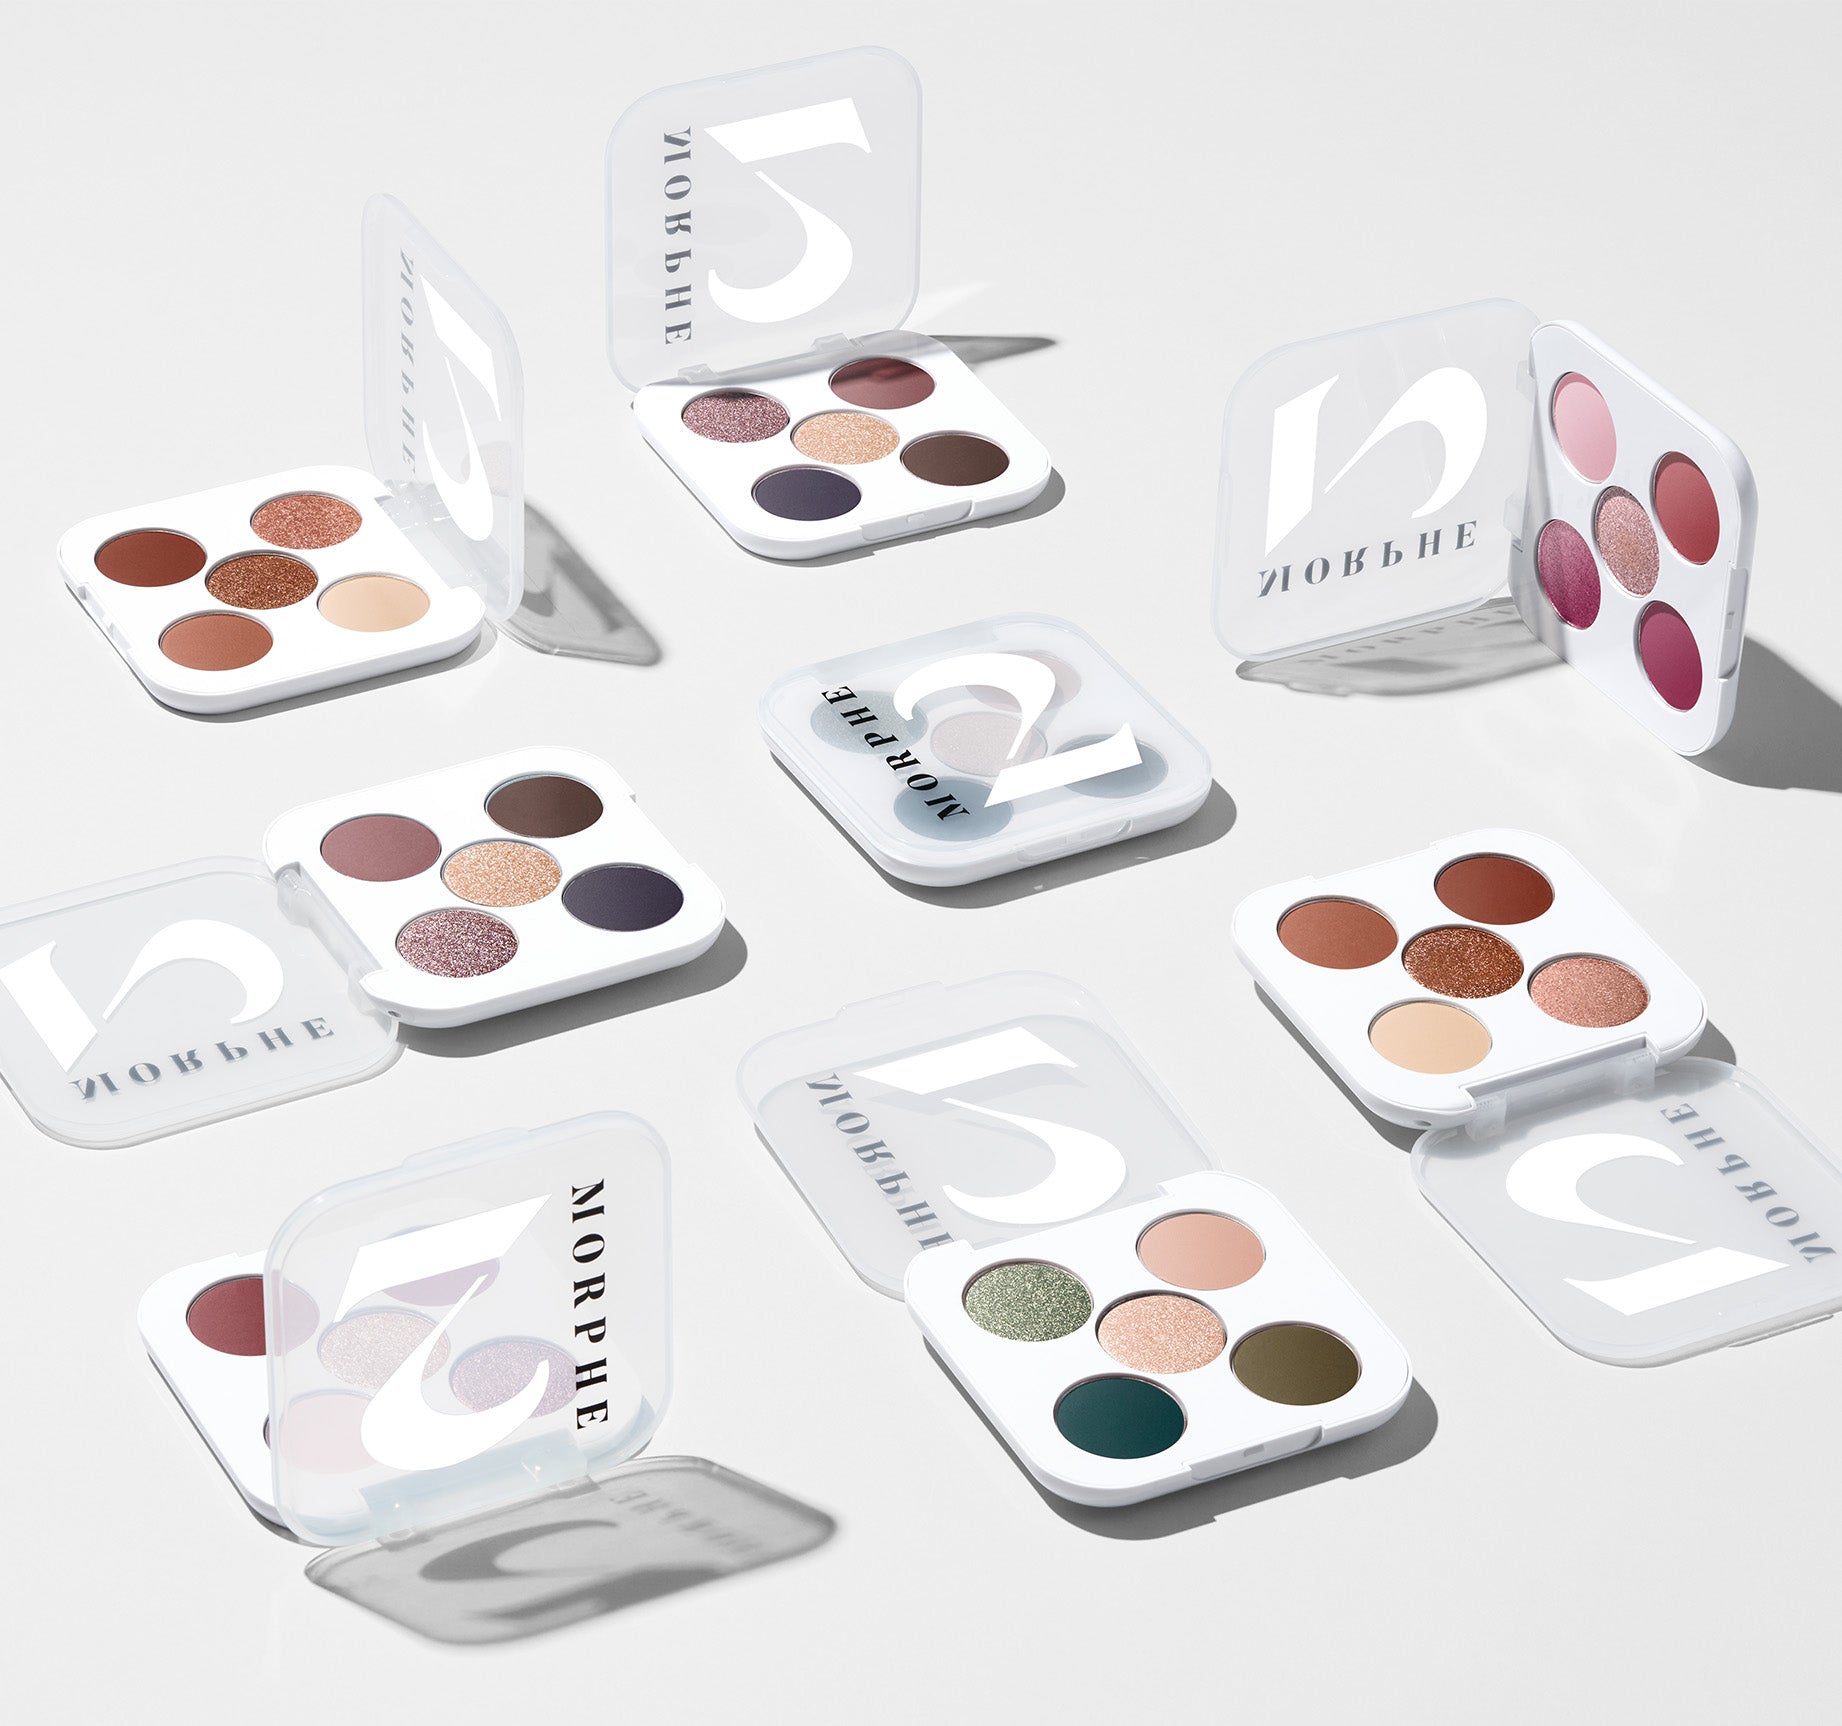 Ready In 5 Eyeshadow Palette - Welcome To Miami - Image 6